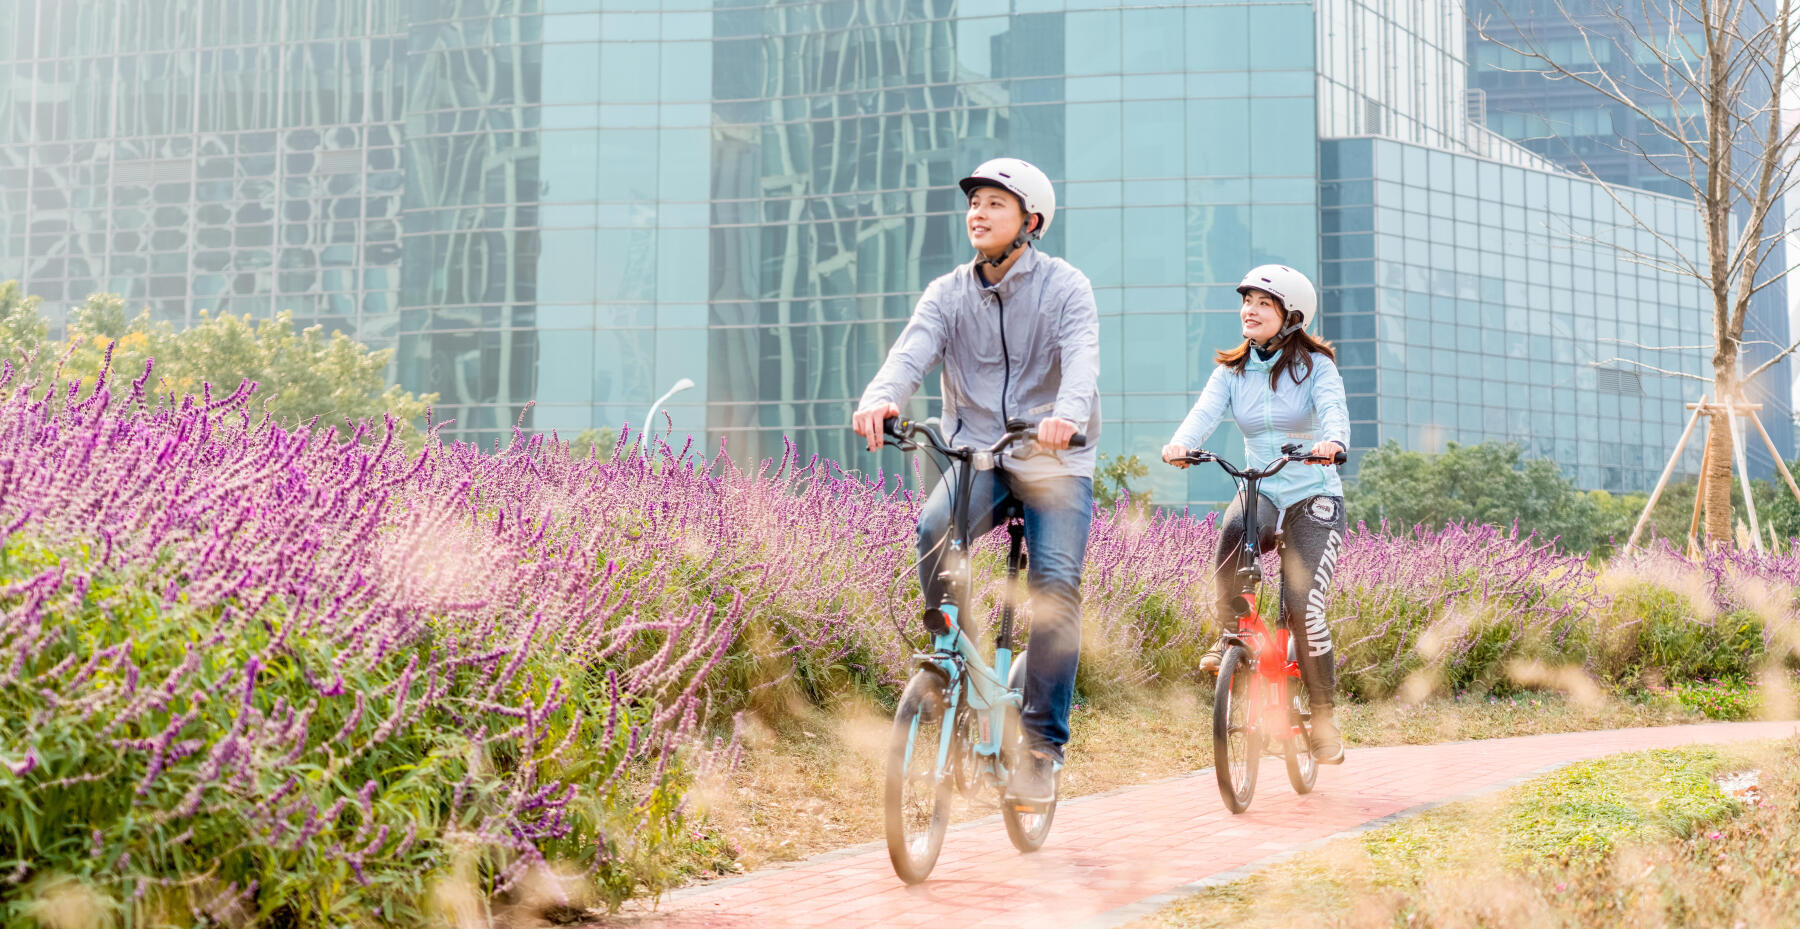 Cycling around greenery is good for your health